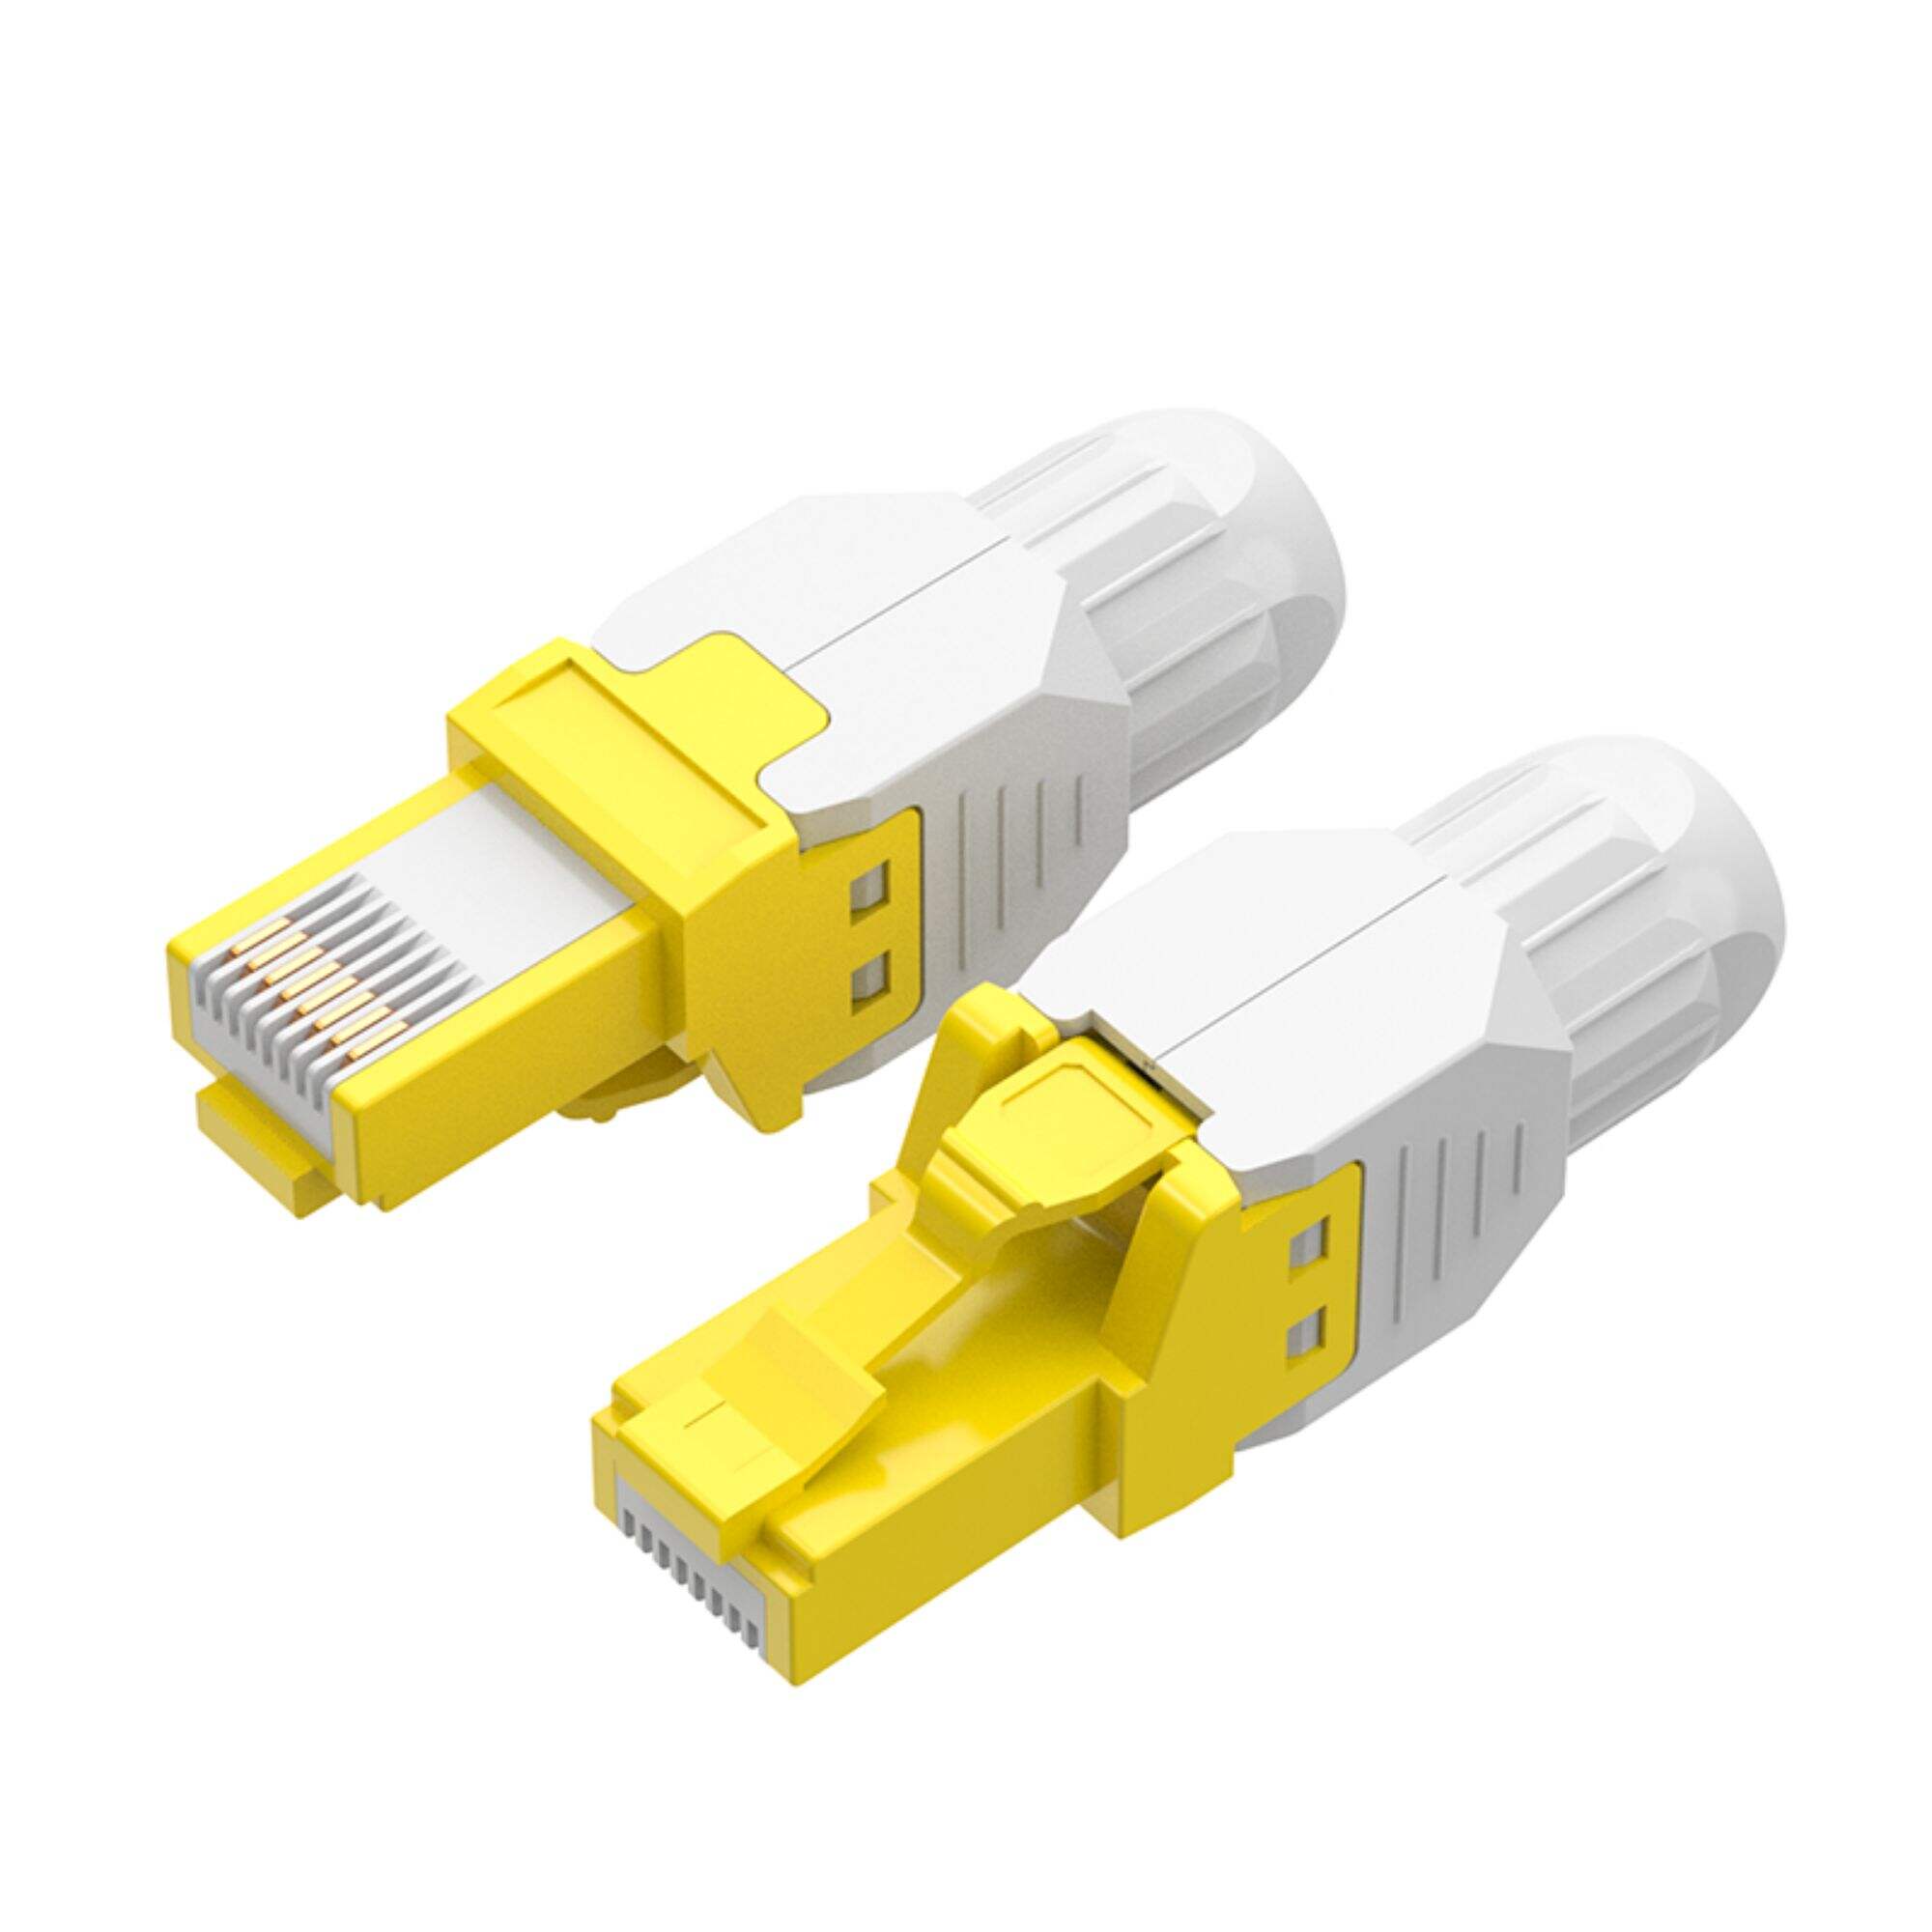 High Quality  RJ45 Connector Tool-Free, Cat5e Cat6 Cat6a Field Termination Plug, UTP CAT6 Connector Toolless white